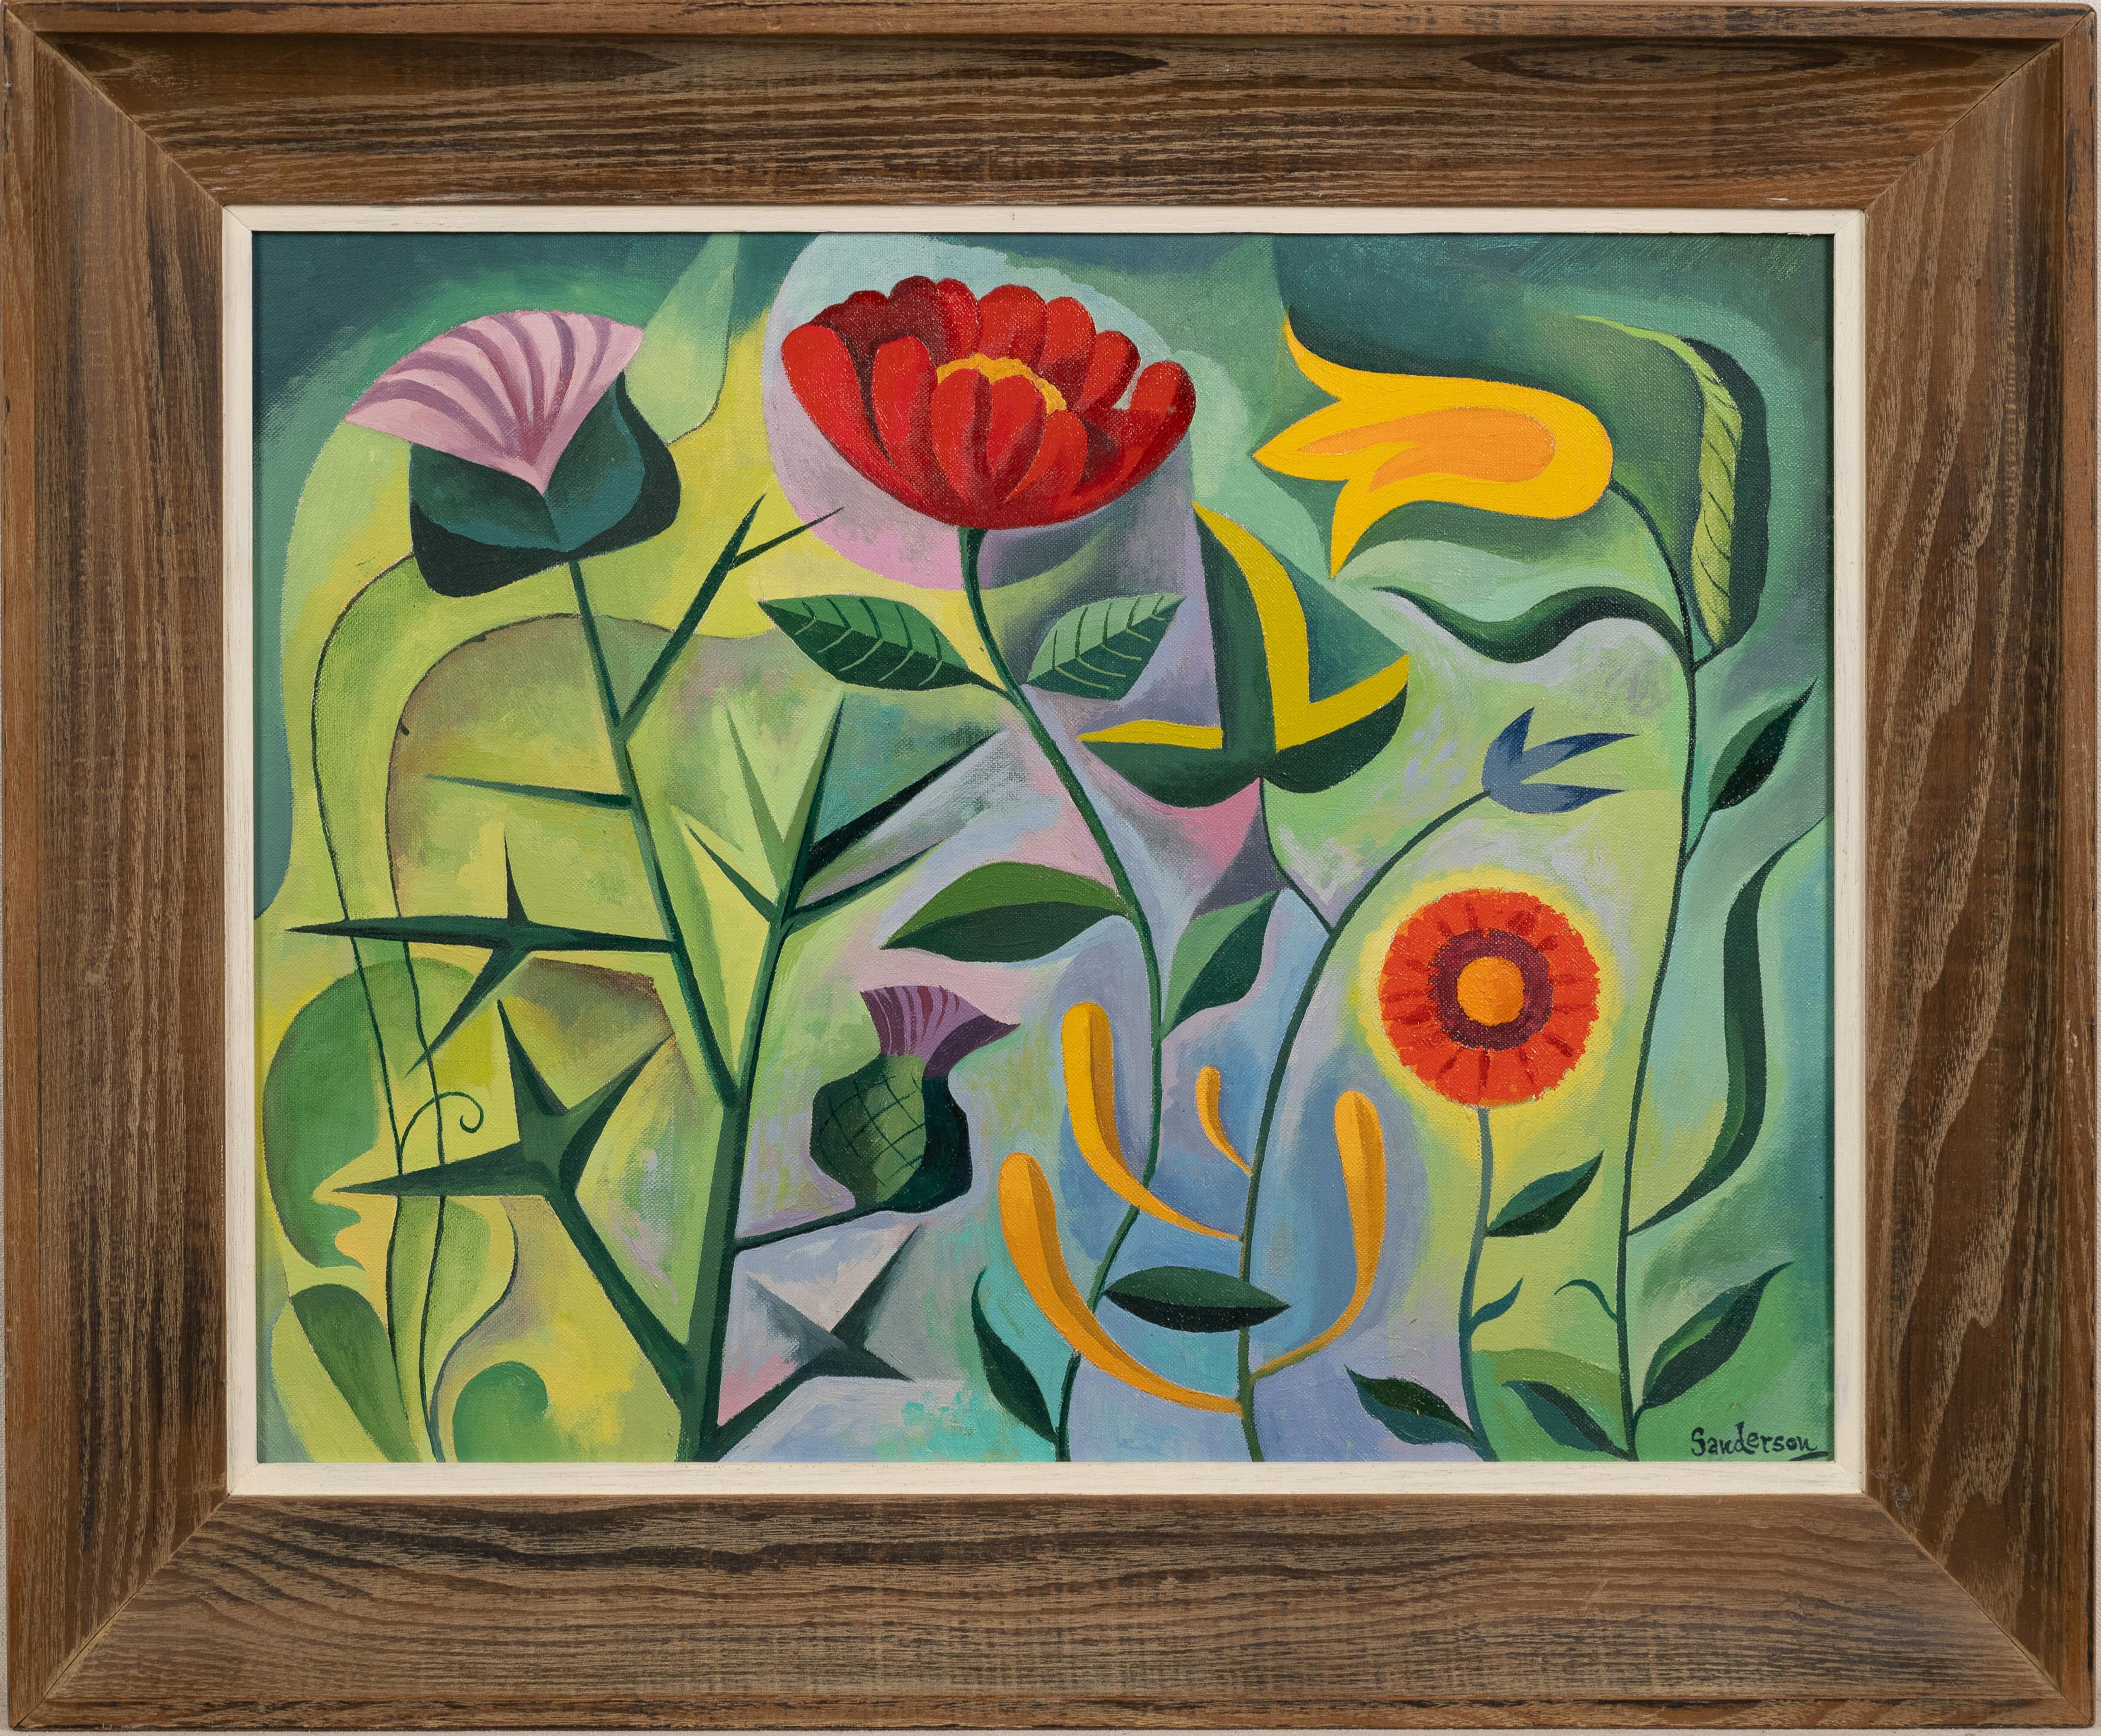 William Sanderson Abstract Painting - Antique American Modernist Signed Surreal Flower Still Life Framed Oil Painting